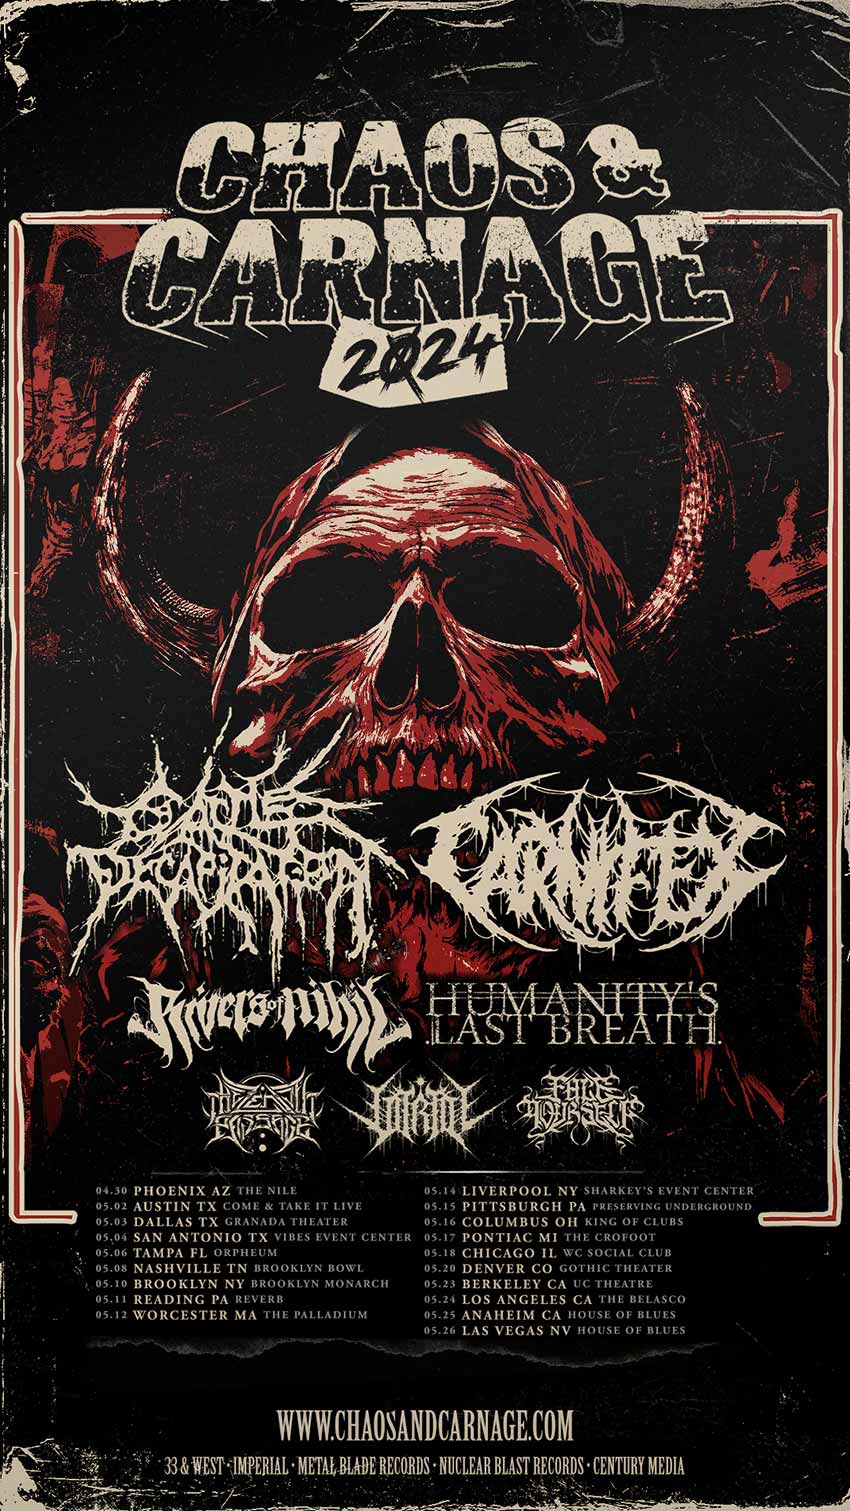 Cattle Decapitation Carnifex tour dates Chaos and Carnage